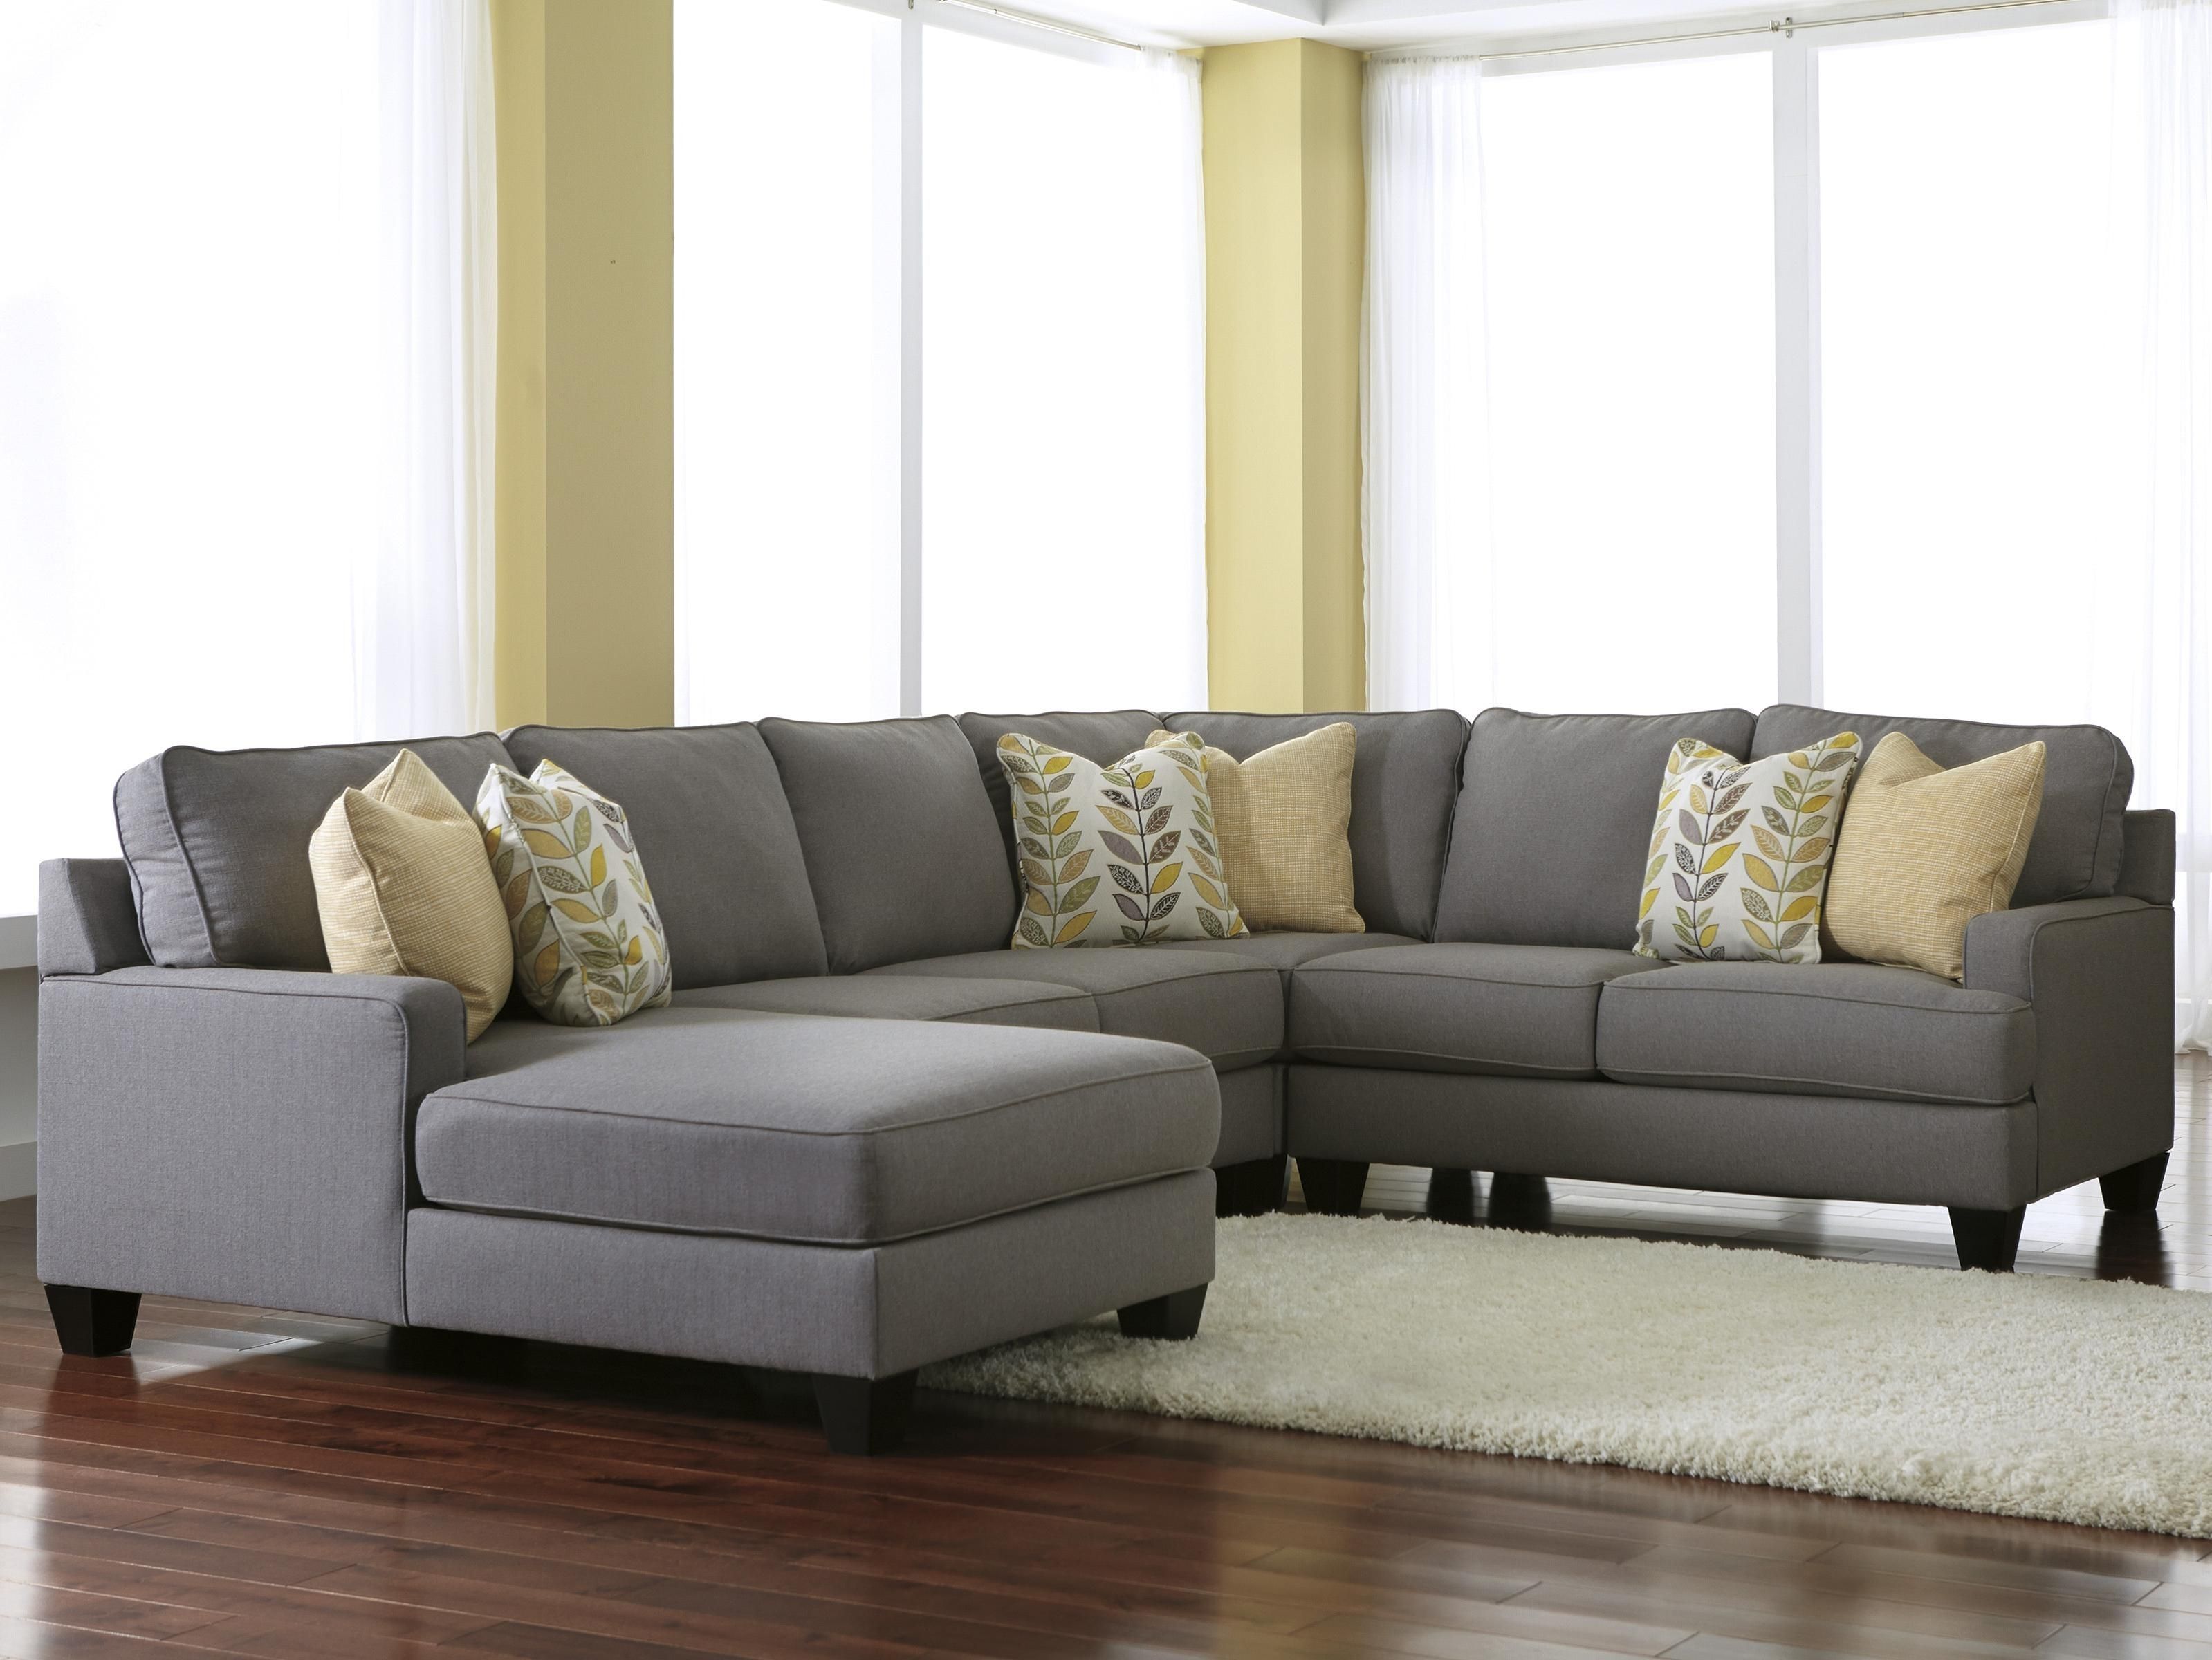 Modern 4 Piece Sectional Sofa With Left Chaise & Reversible Seat Pertaining To Eau Claire Wi Sectional Sofas (View 1 of 10)